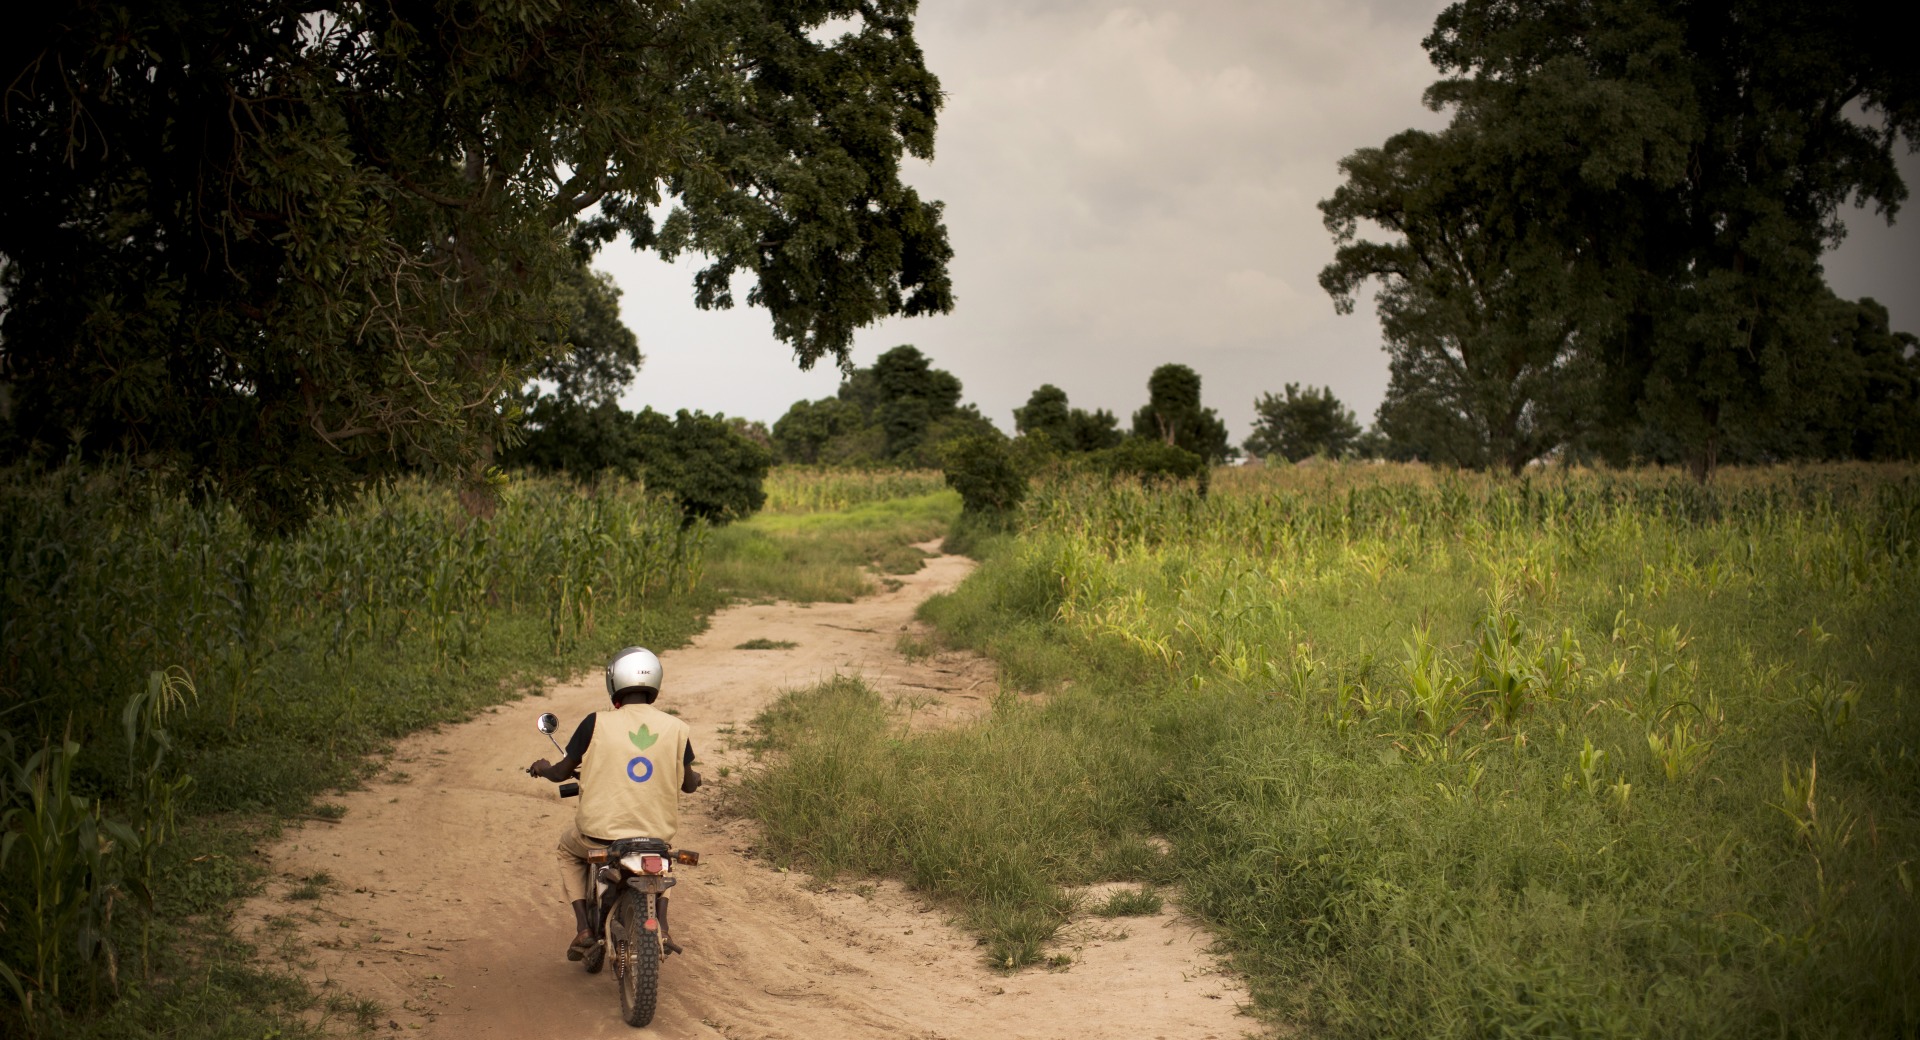 An Action Against Hunger aid worker drives a motorbike down a dirt road in Mali